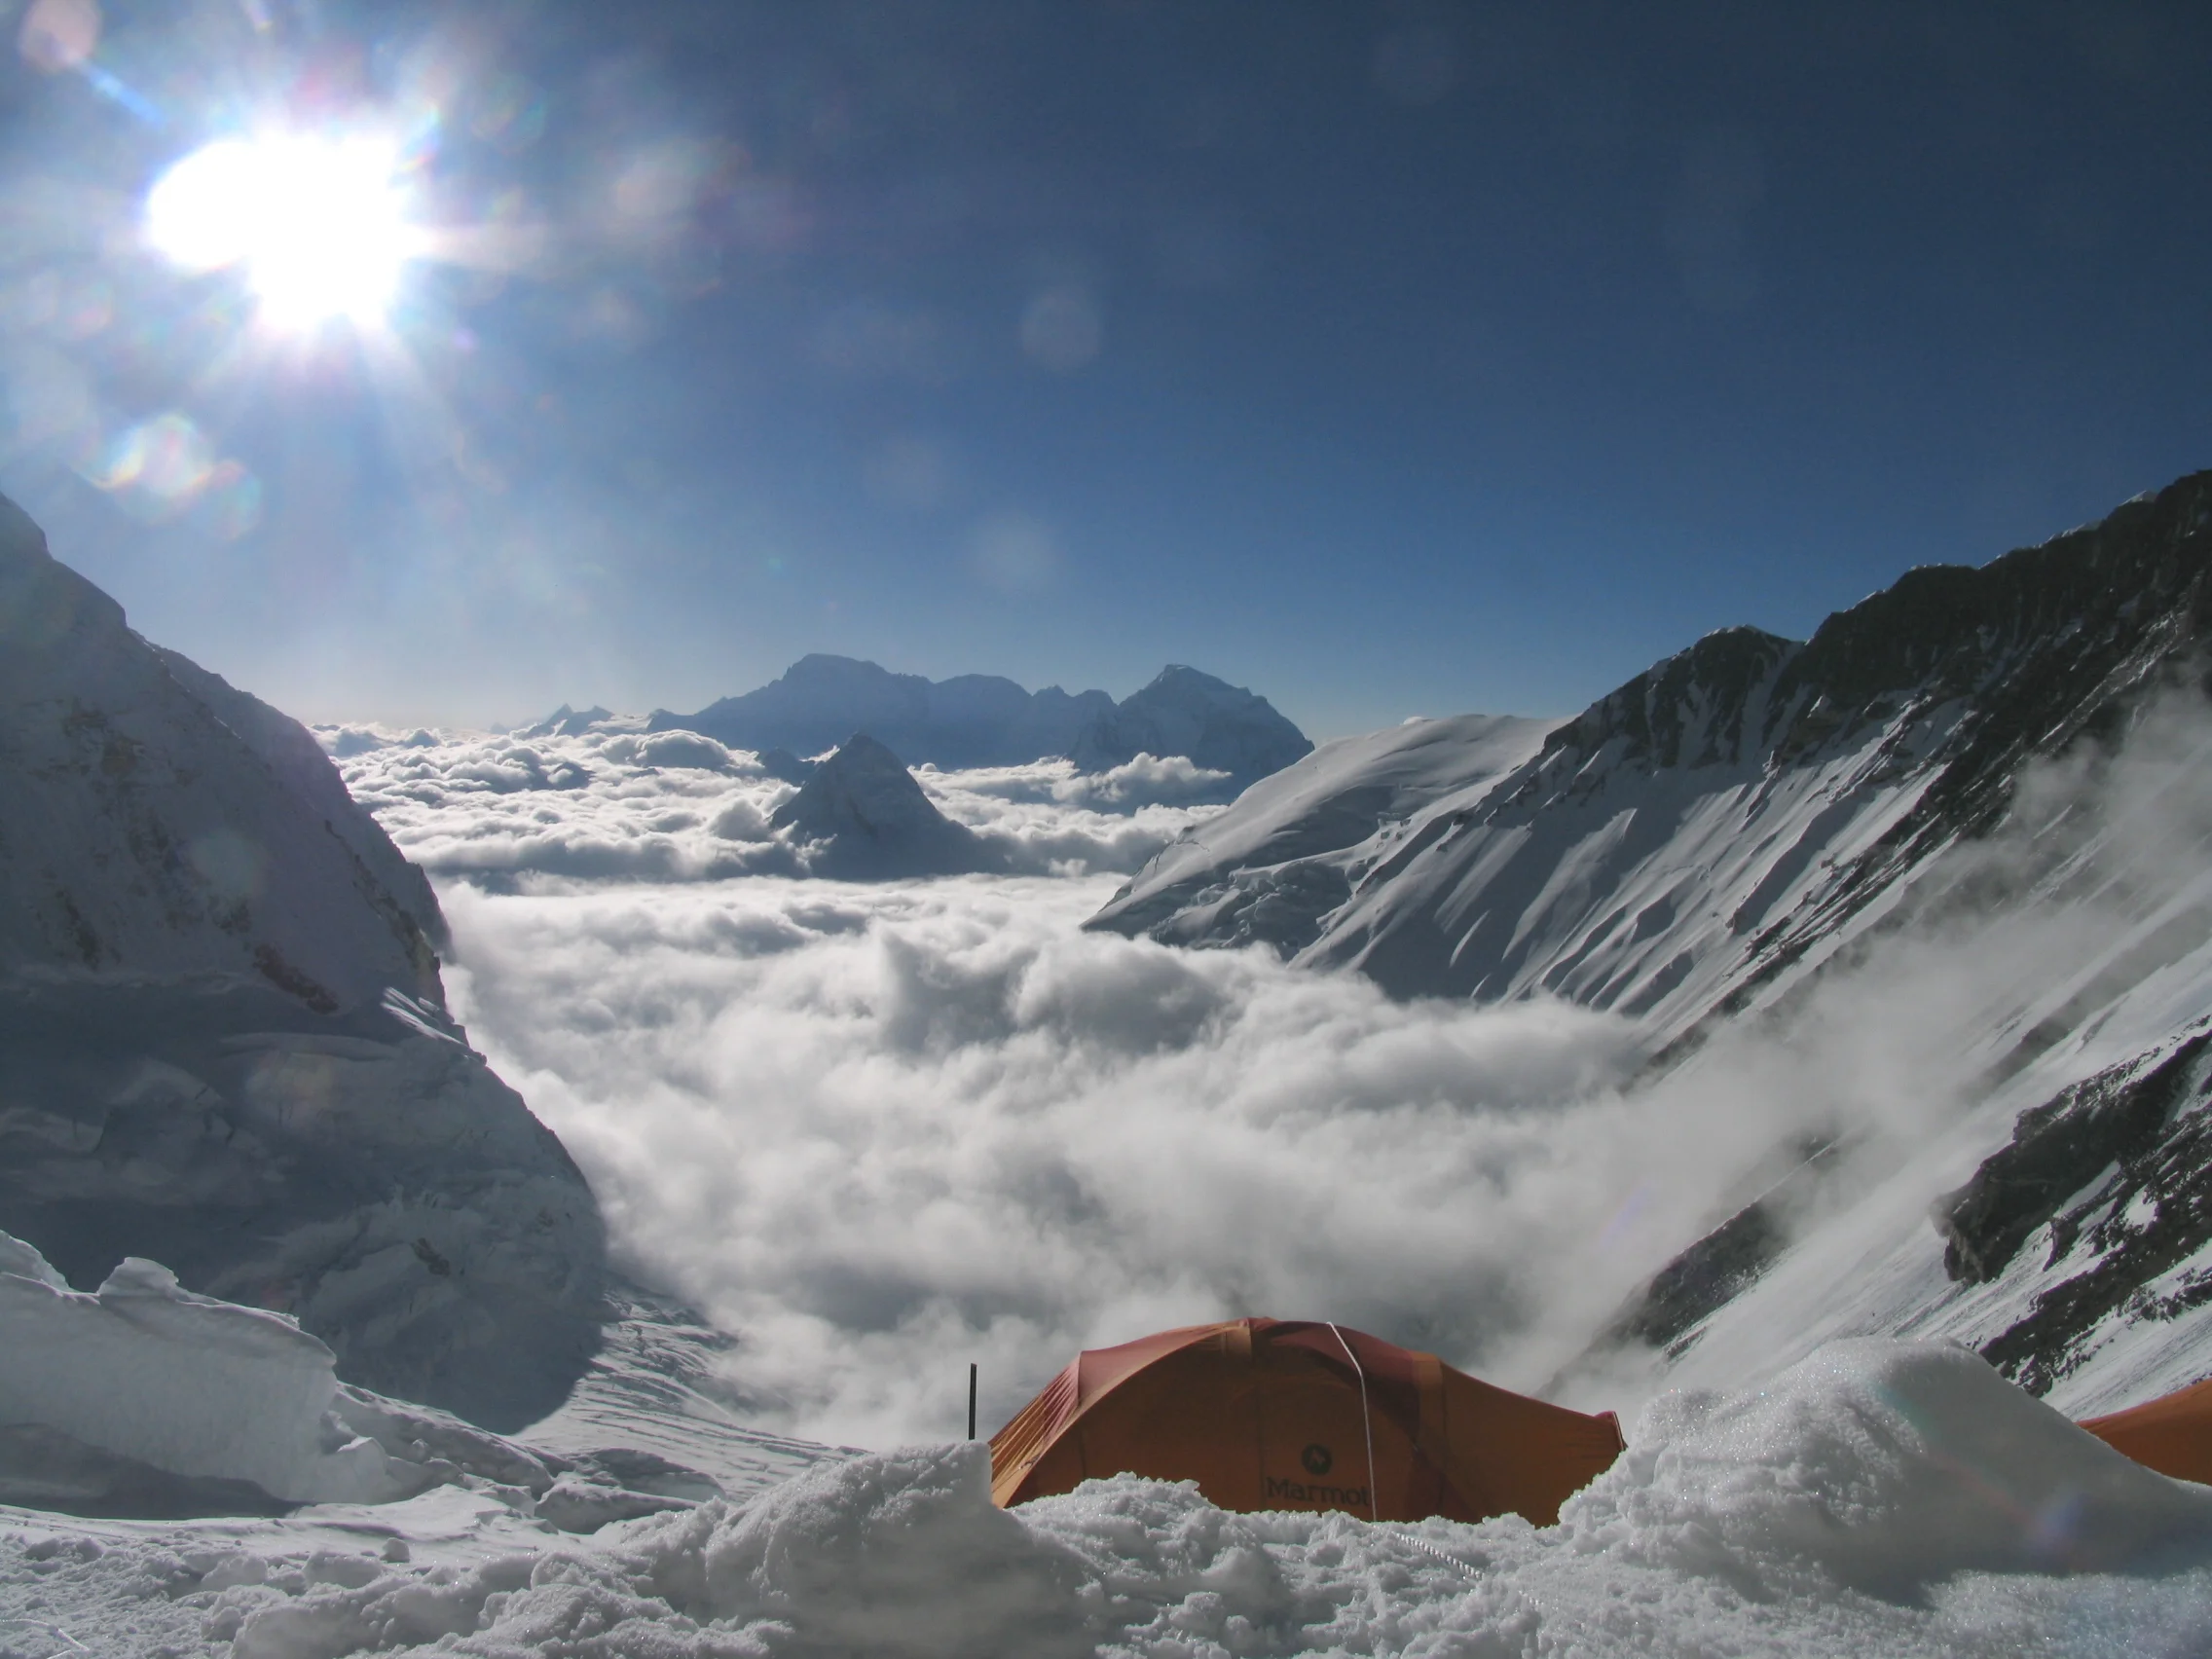 Photo from the Mallory's tent at Camp 3 on Mount Everest